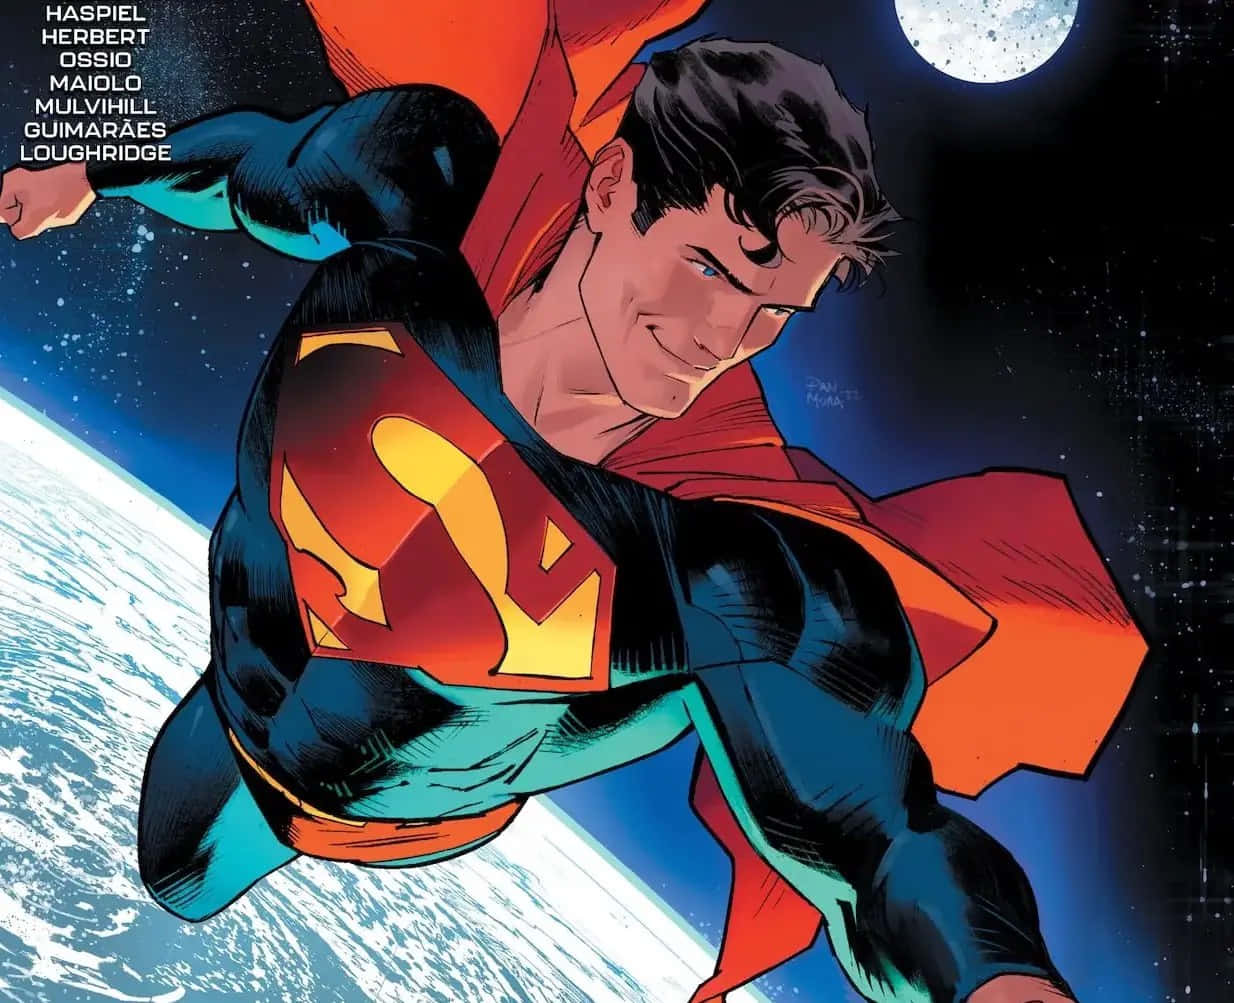 Clark Kent as Superman: The Man of Steel Shows off his Superhuman Strength